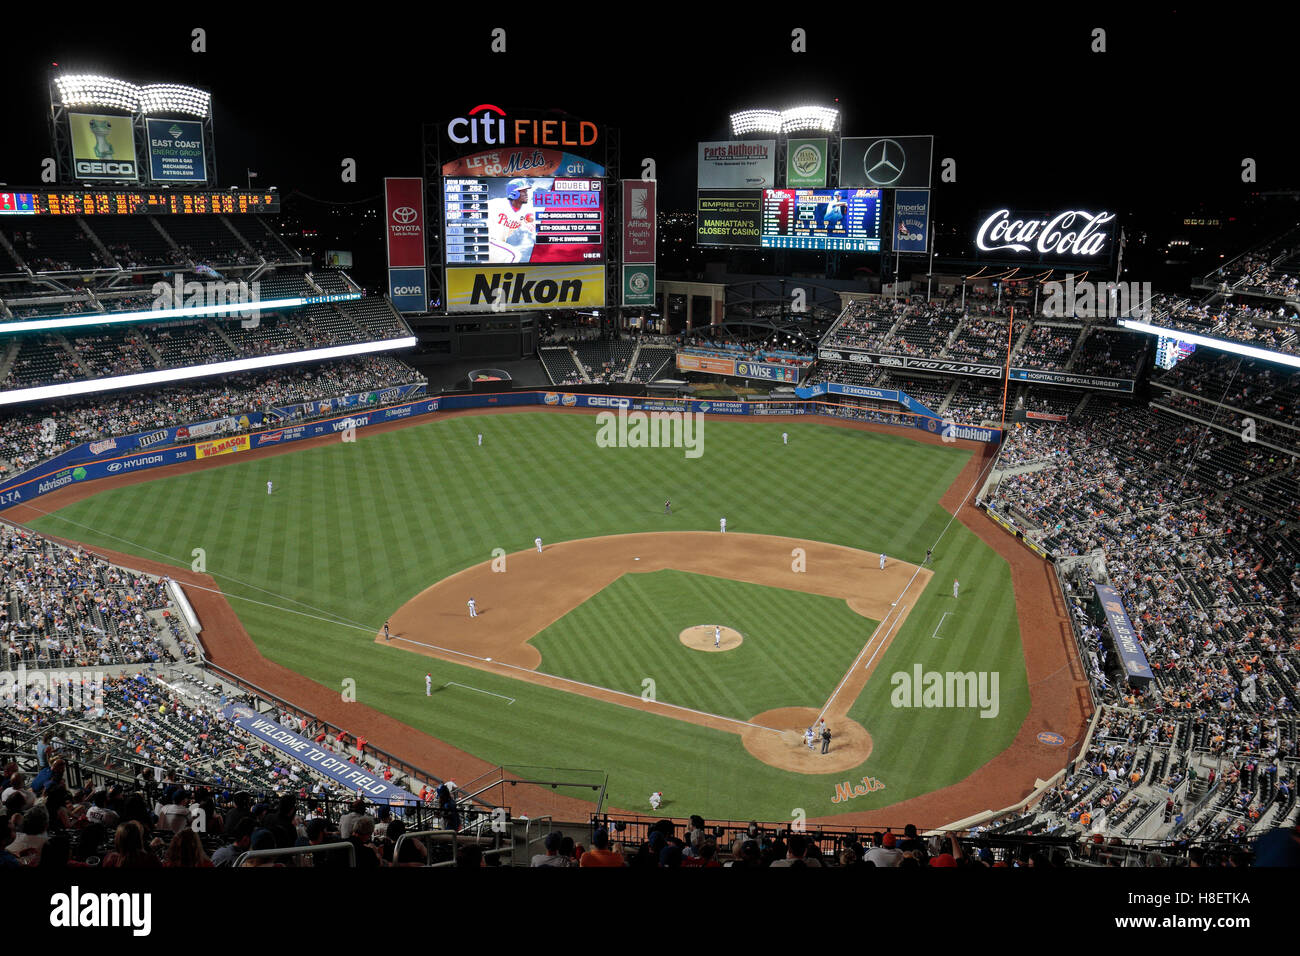 Night time view of Citi Field, the home stadium of the MLB New York Mets during a 2016 game, New York, United States. Stock Photo